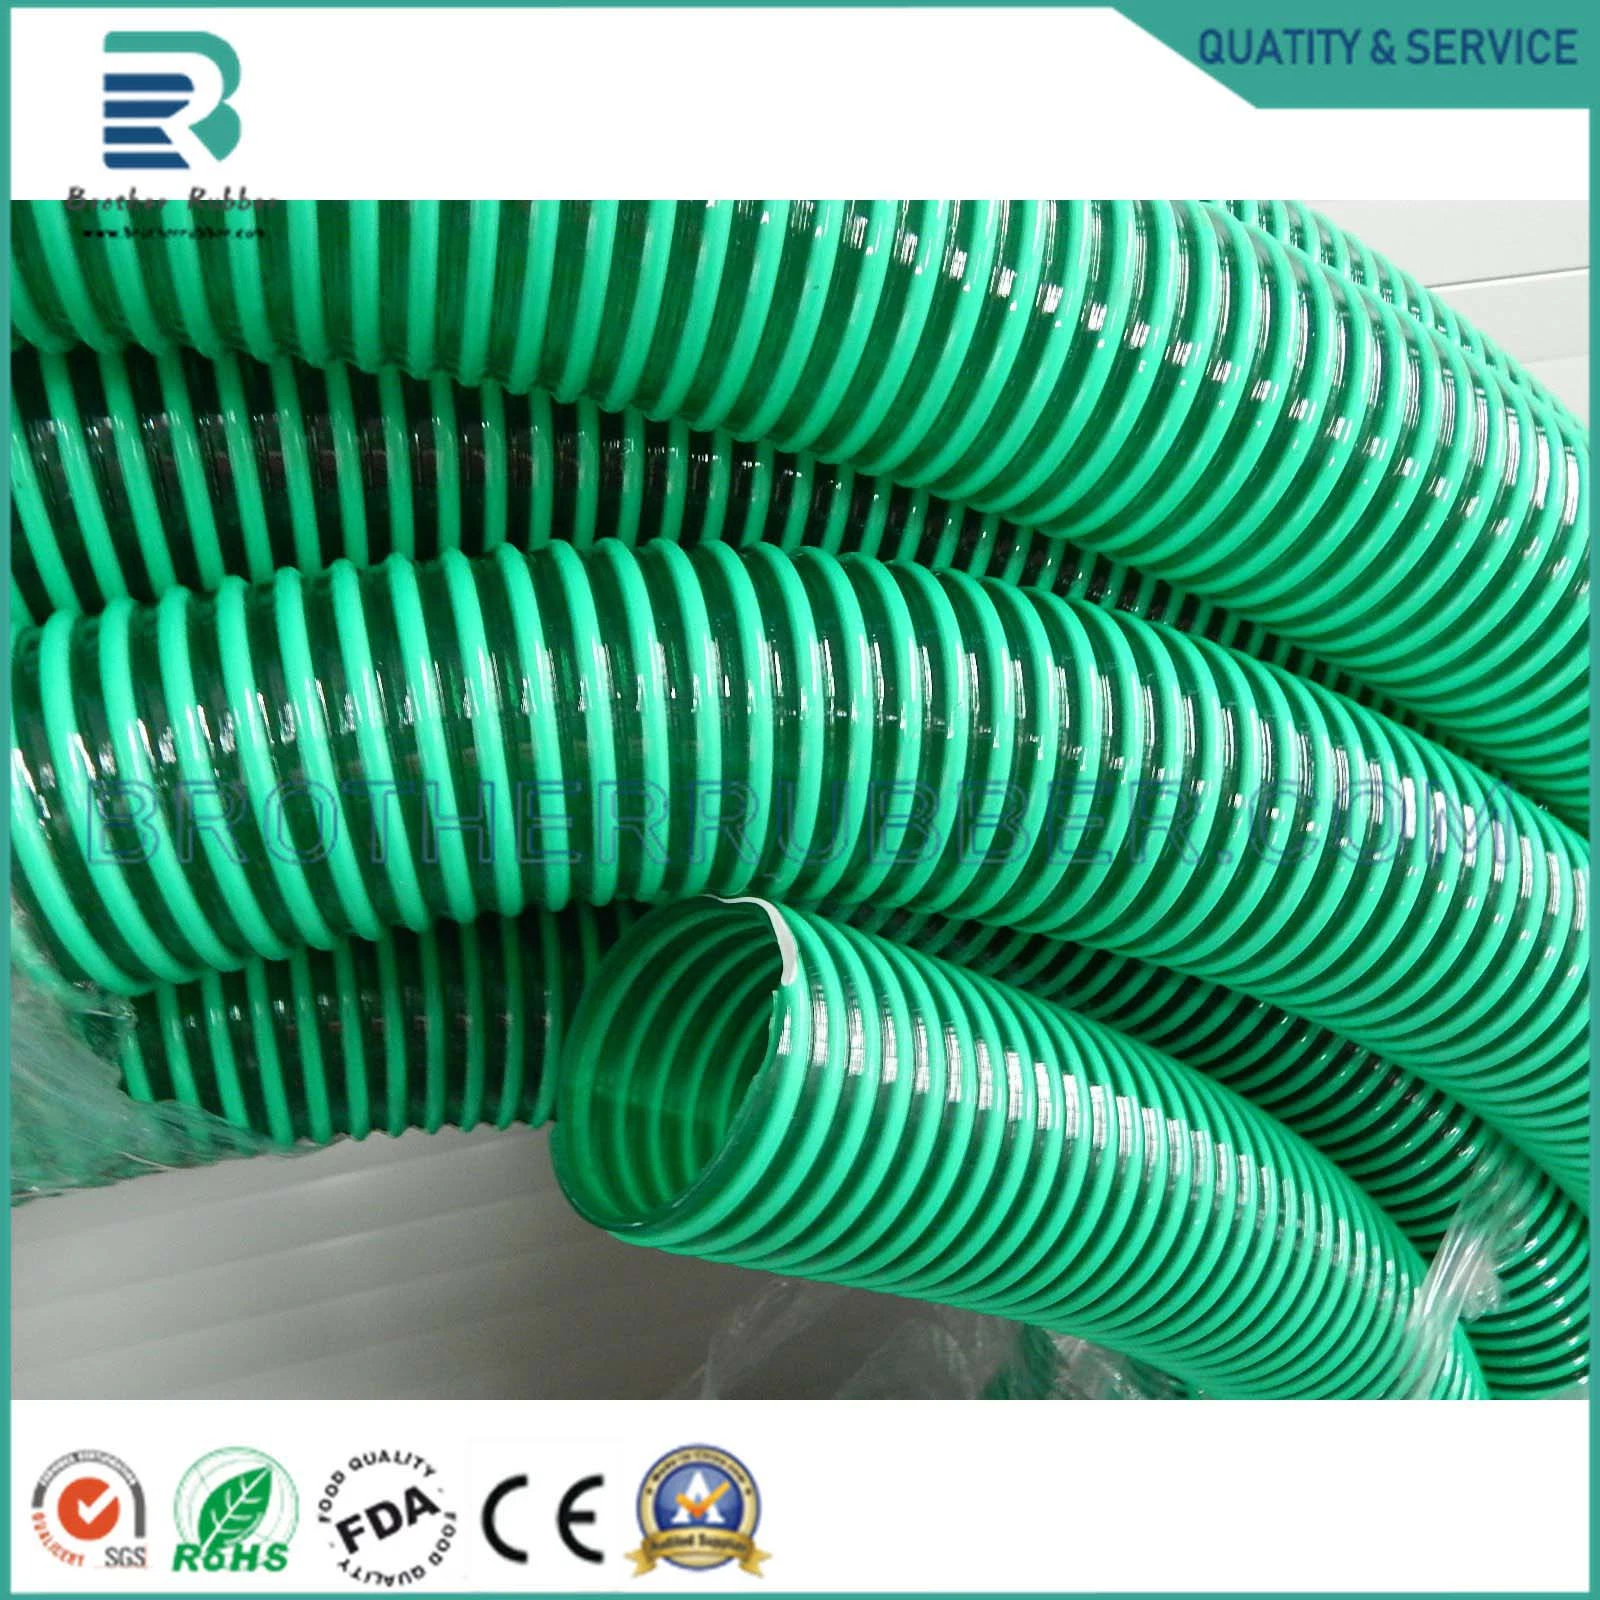 High quality/High cost performance  Clear Transparent Polyurethane Hose Pipe Air Pipe PU Tube